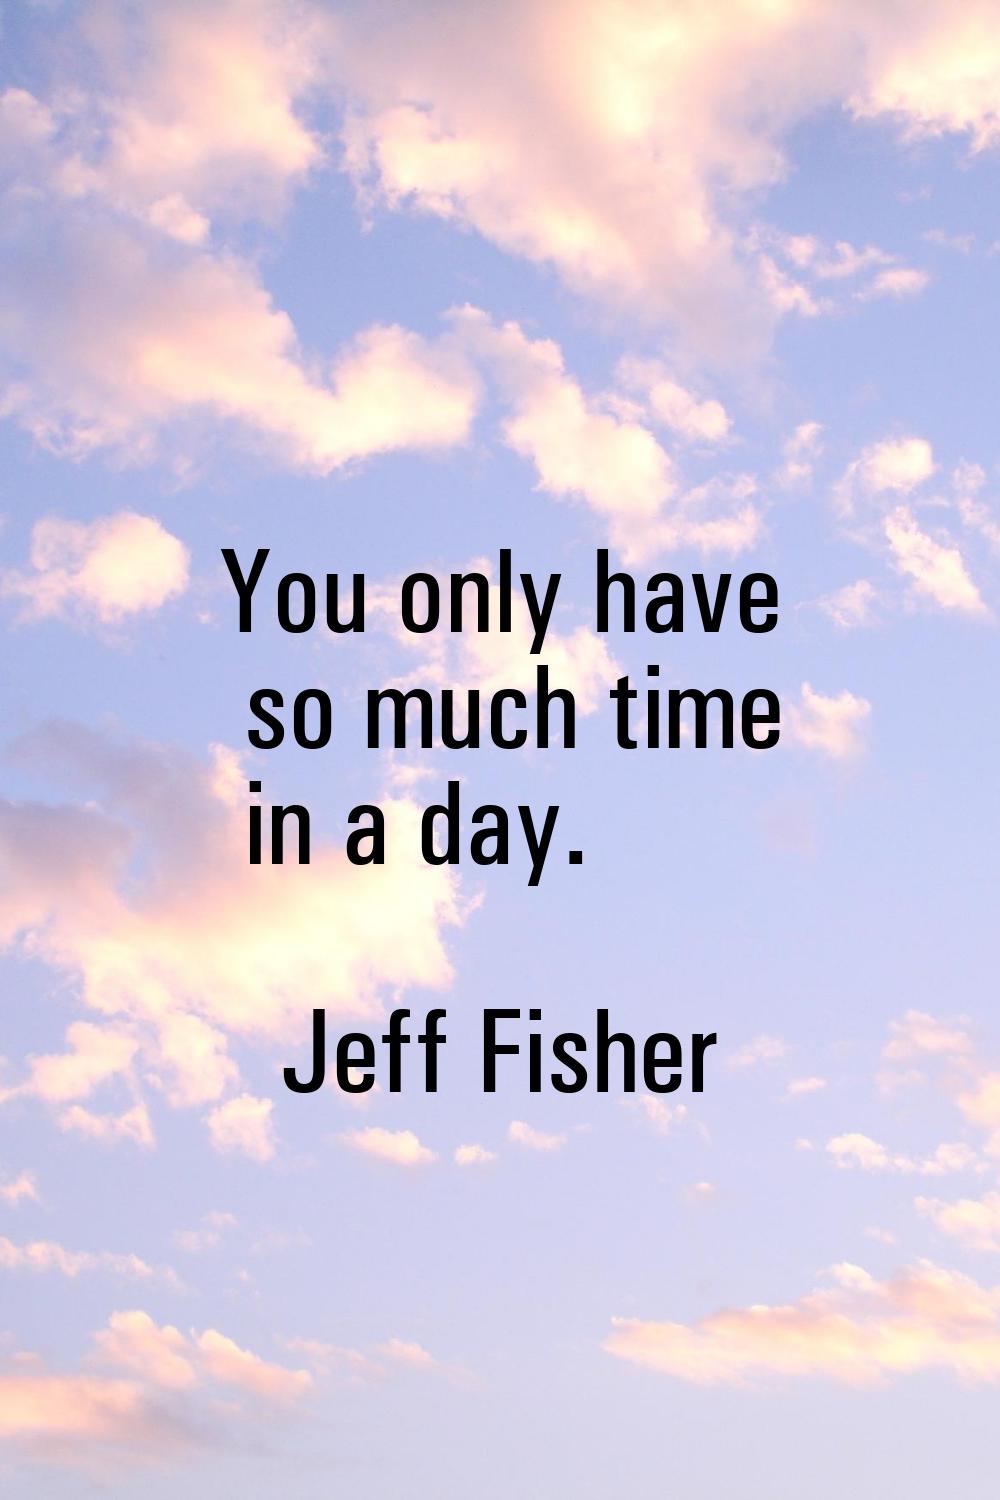 You only have so much time in a day.